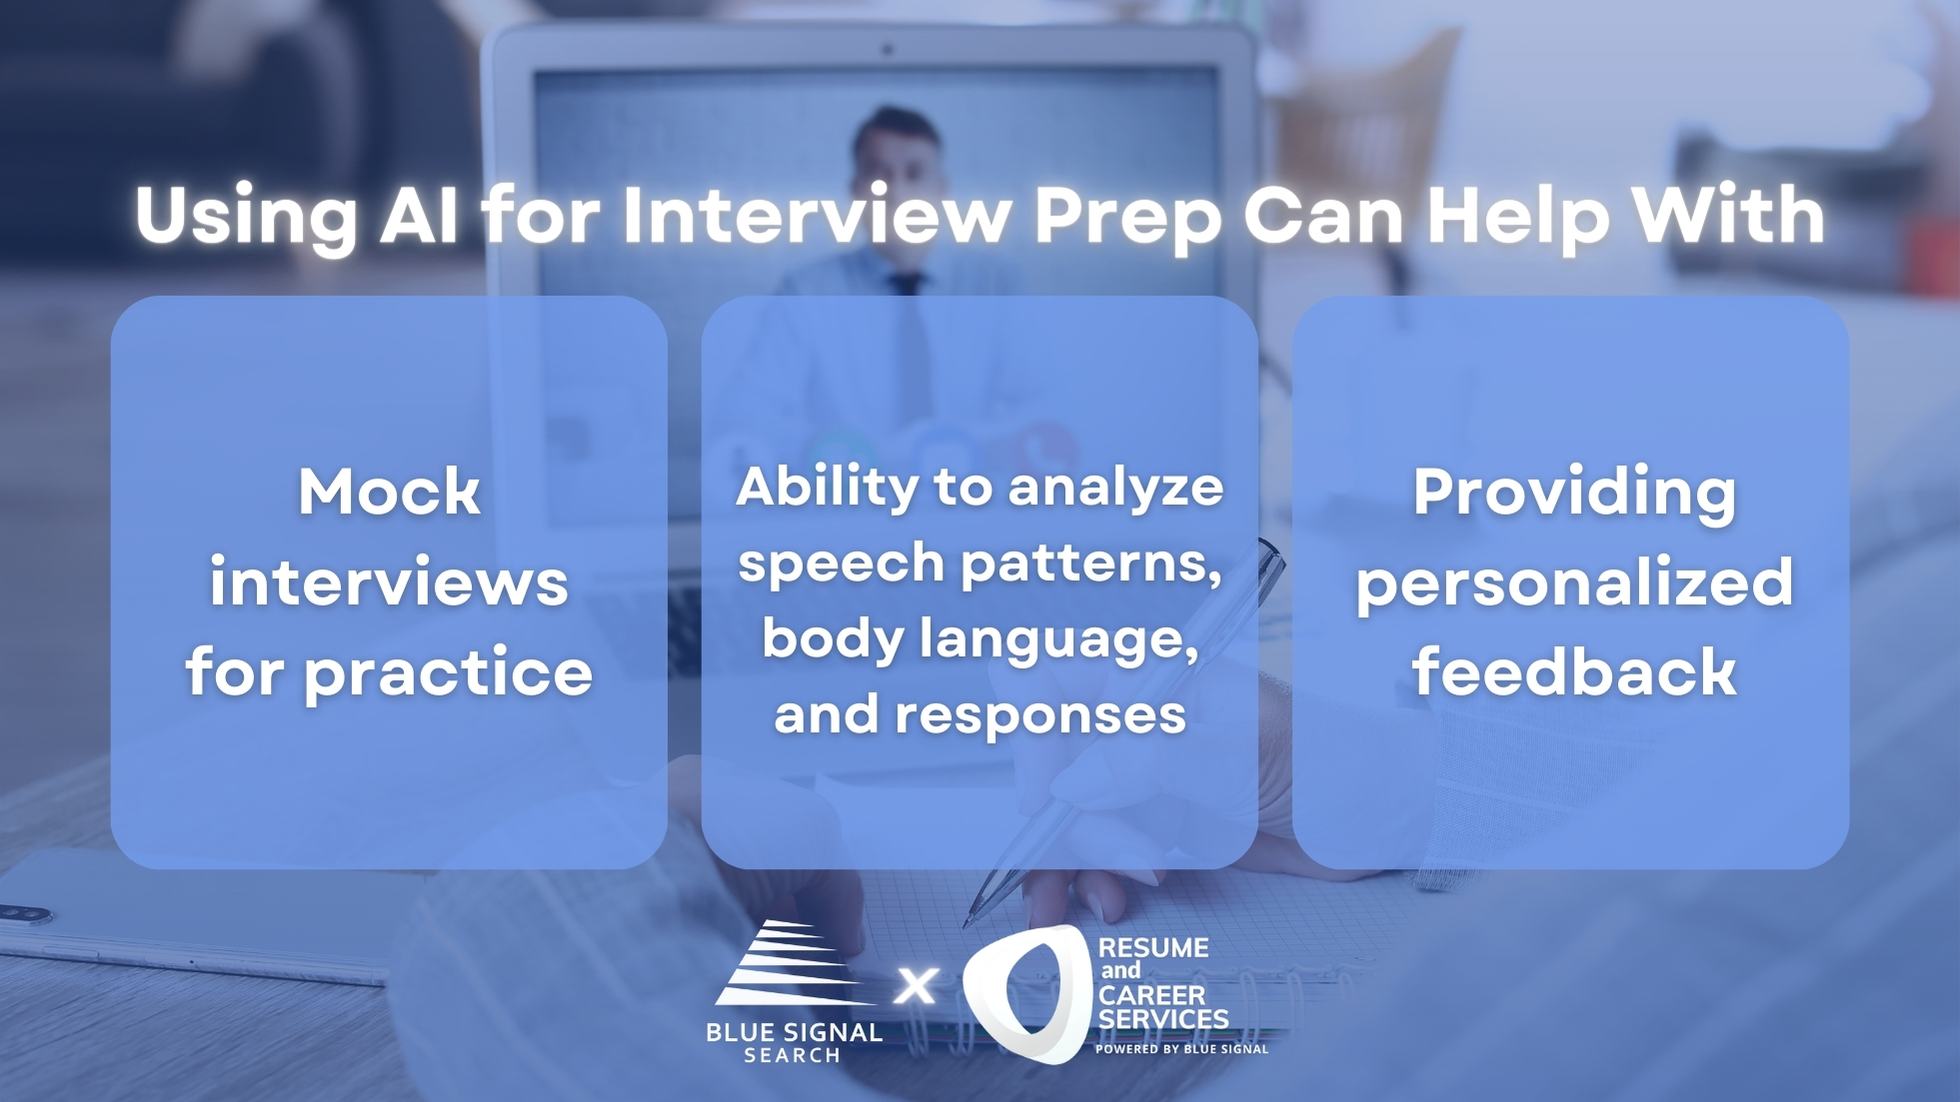 Infographic showing benefits of AI for interview prep, including mock interviews for practice, speech and body language analysis, and personalized feedback.